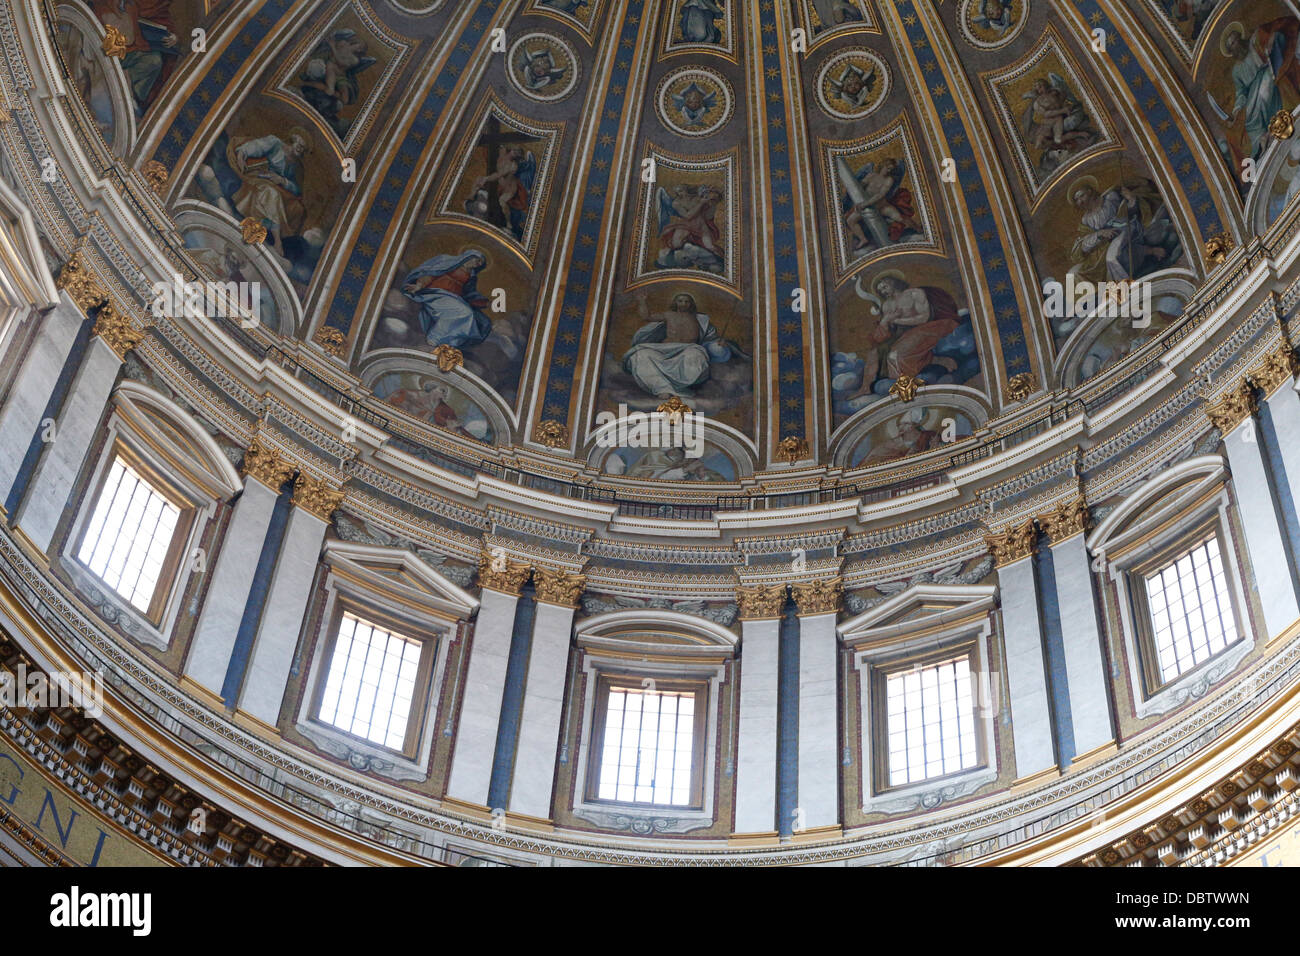 Dome and frescoes in St. Peter's Basilica, Vatican, Rome, Lazio, Italy, Europe Stock Photo